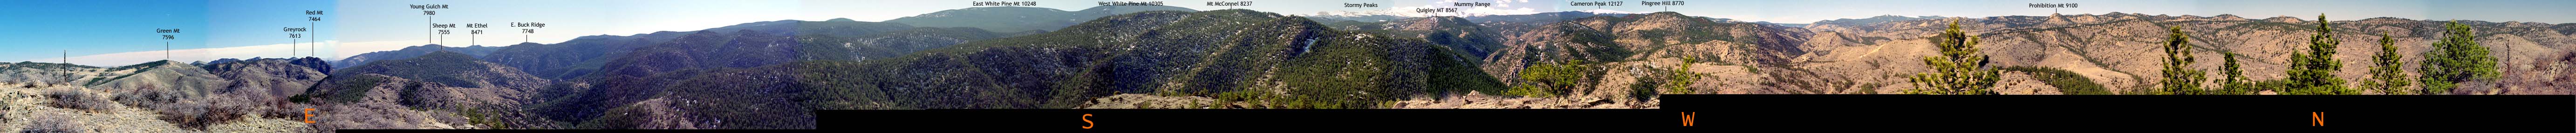 Lower Poudre Canyon Panorama